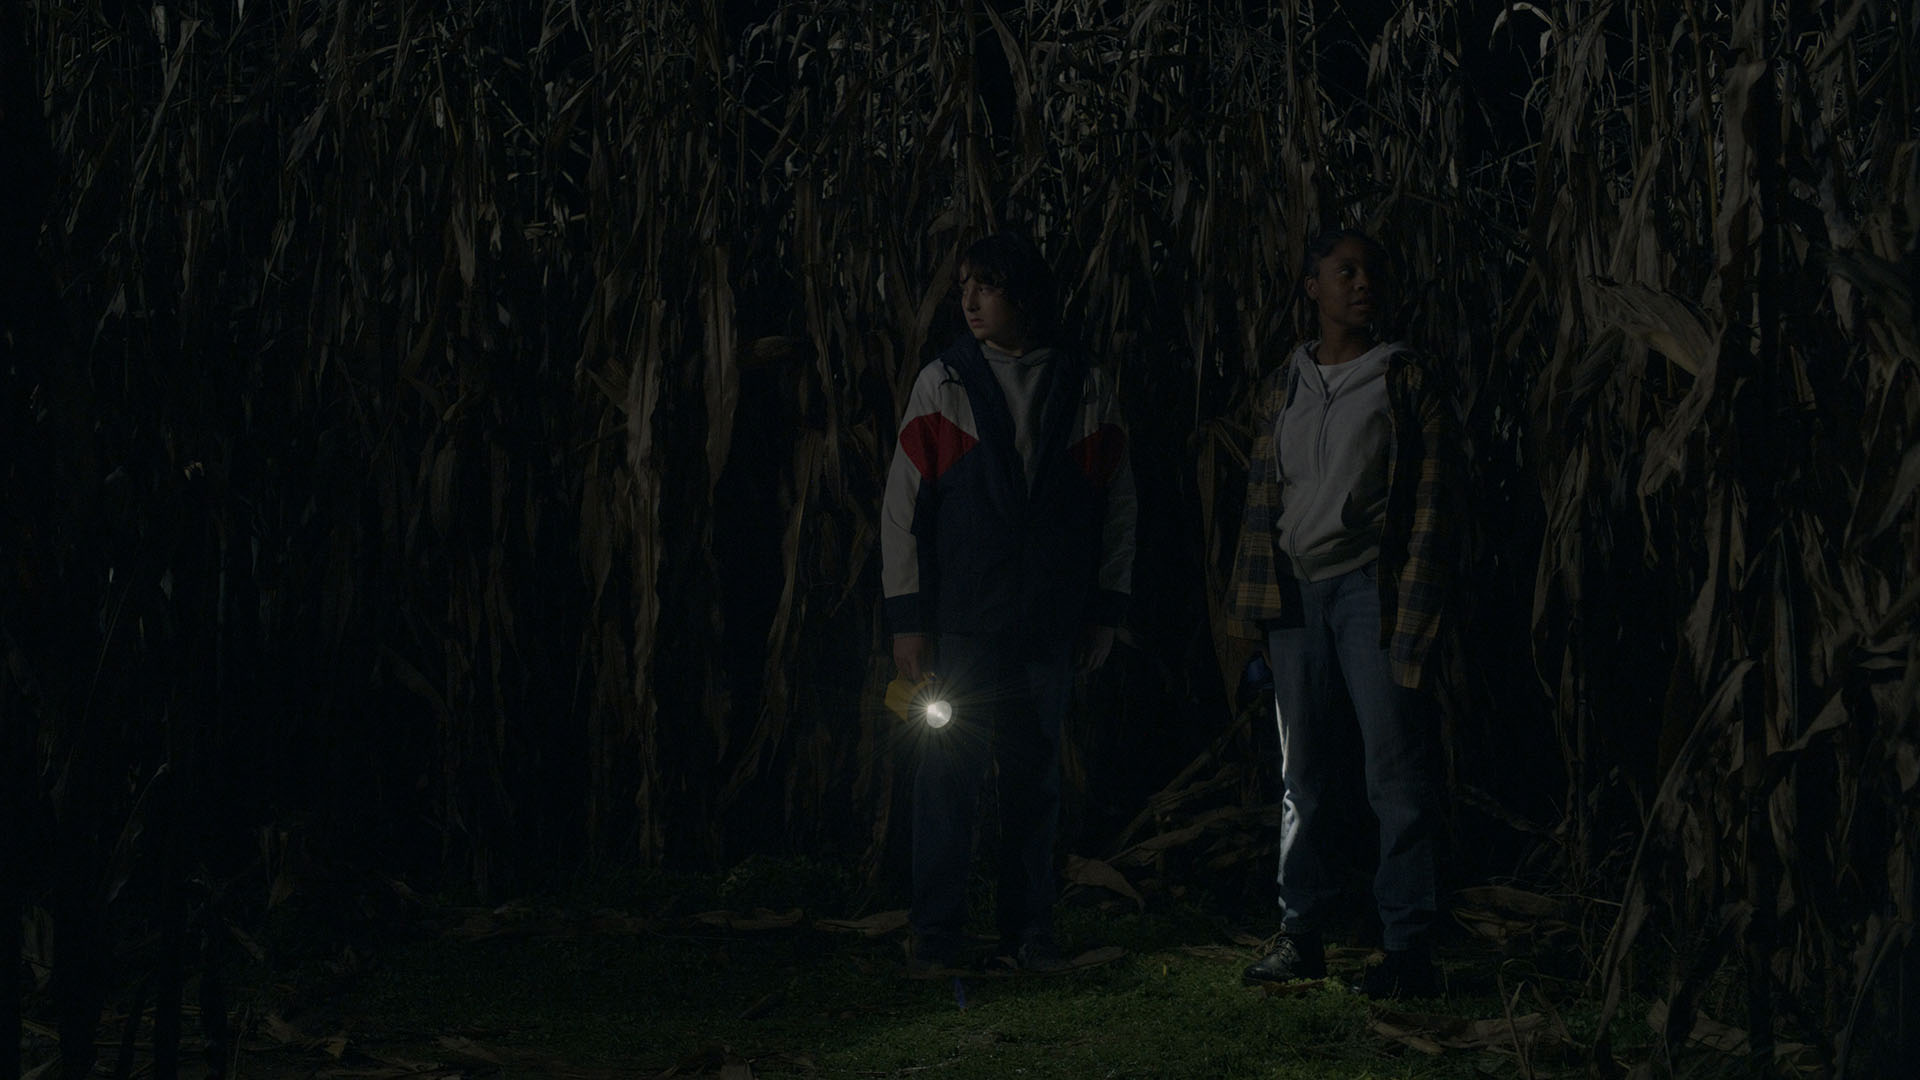 Cole and Shelby stand still in the middle of a cornfield, their flashlights illuminating the stalks around them.